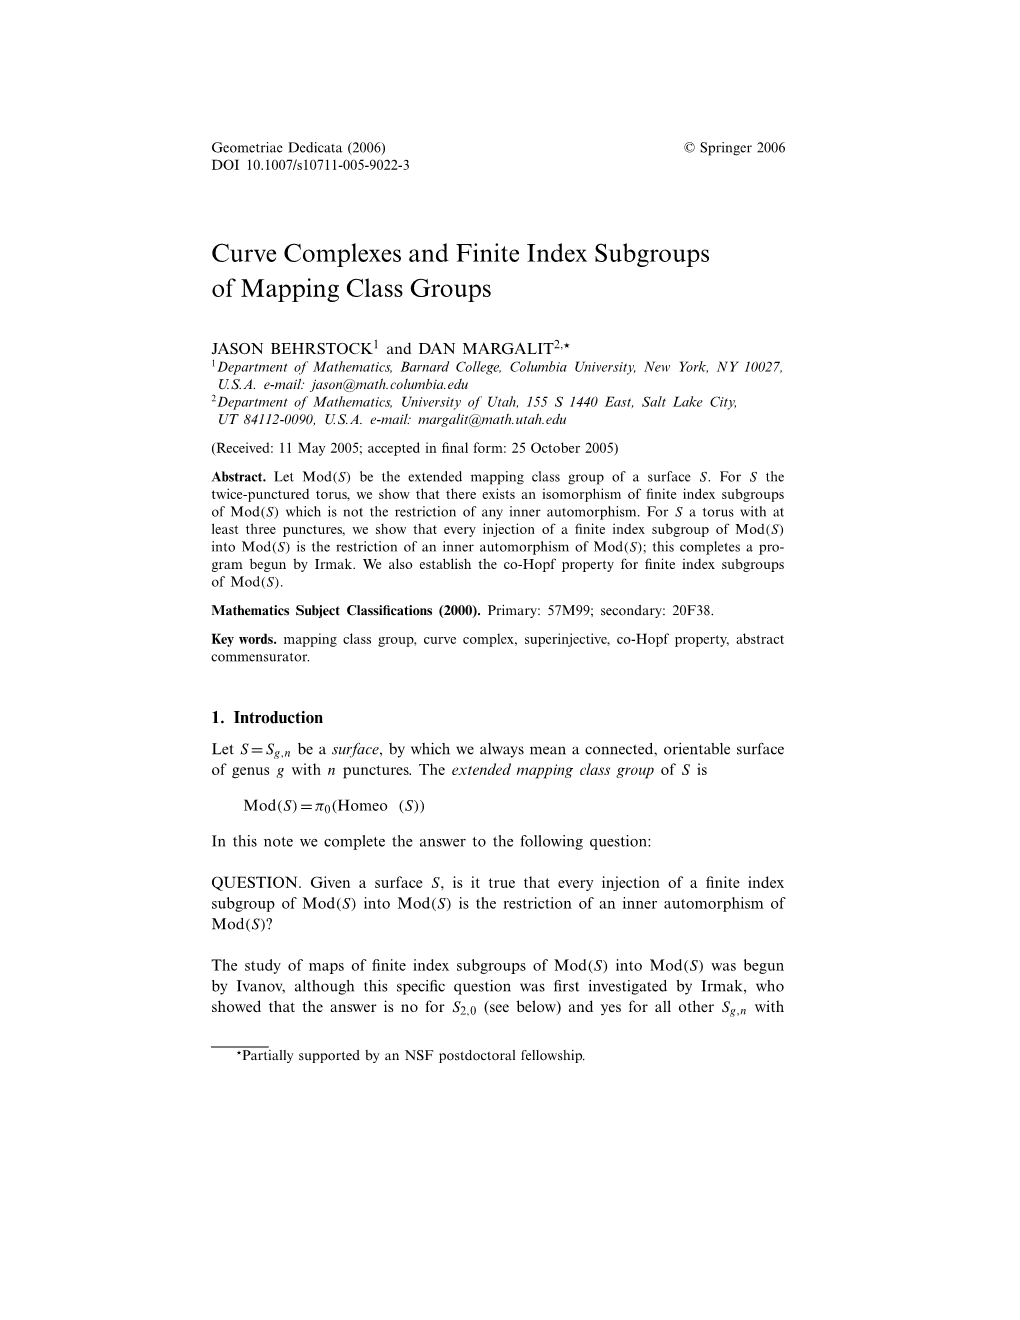 Curve Complexes and Finite Index Subgroups of Mapping Class Groups